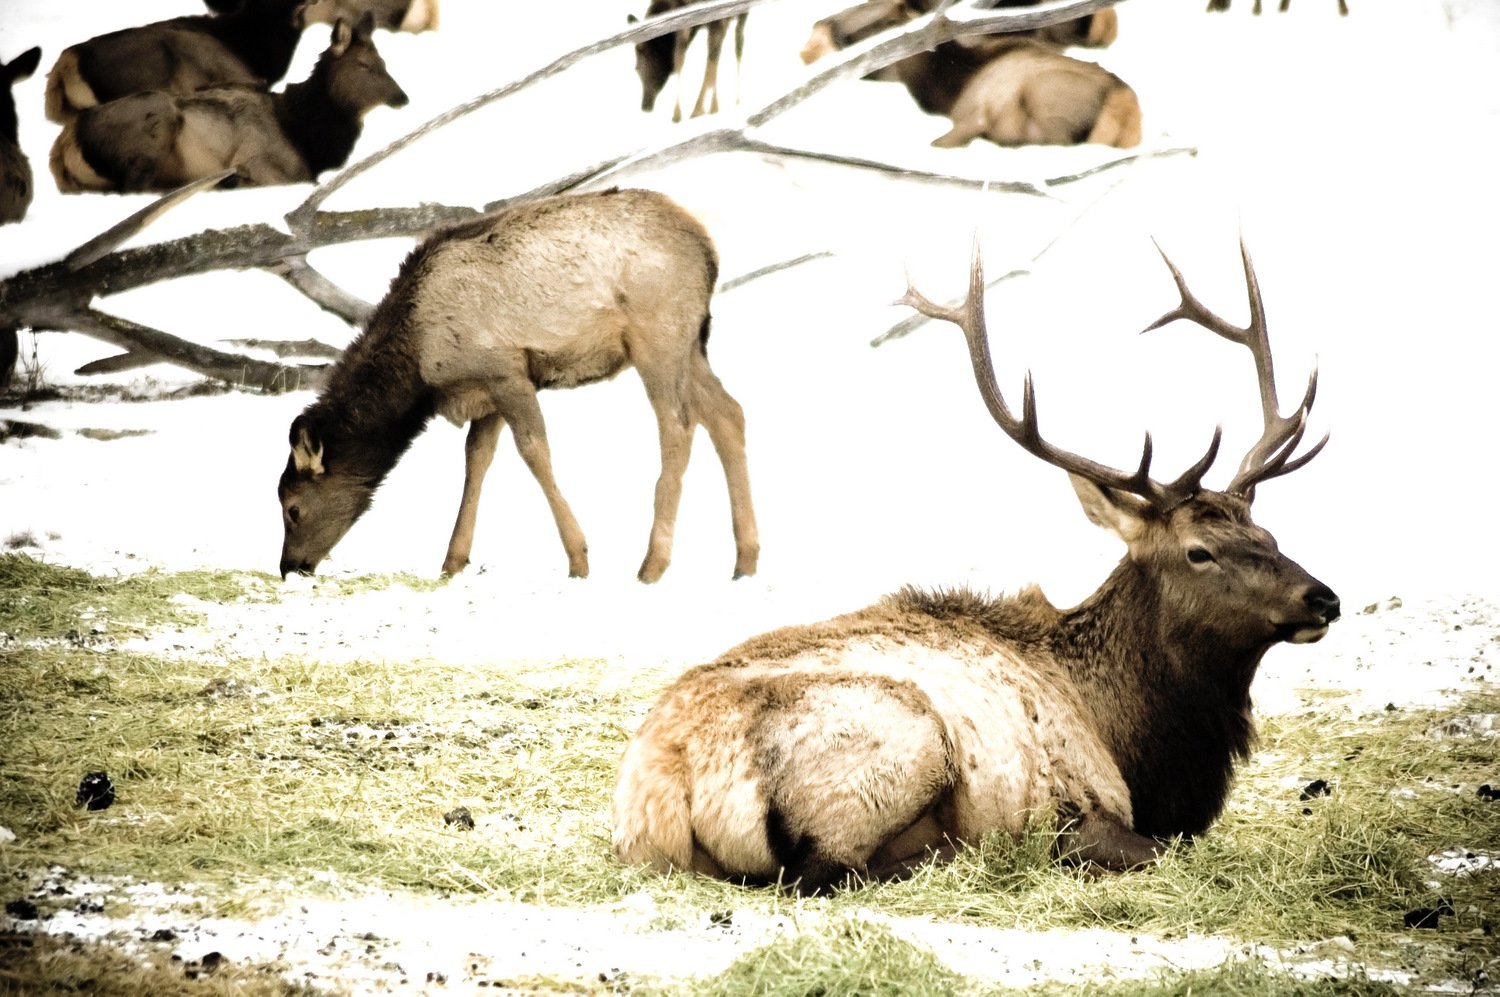 the elk are resting and enjoying their time in the woods